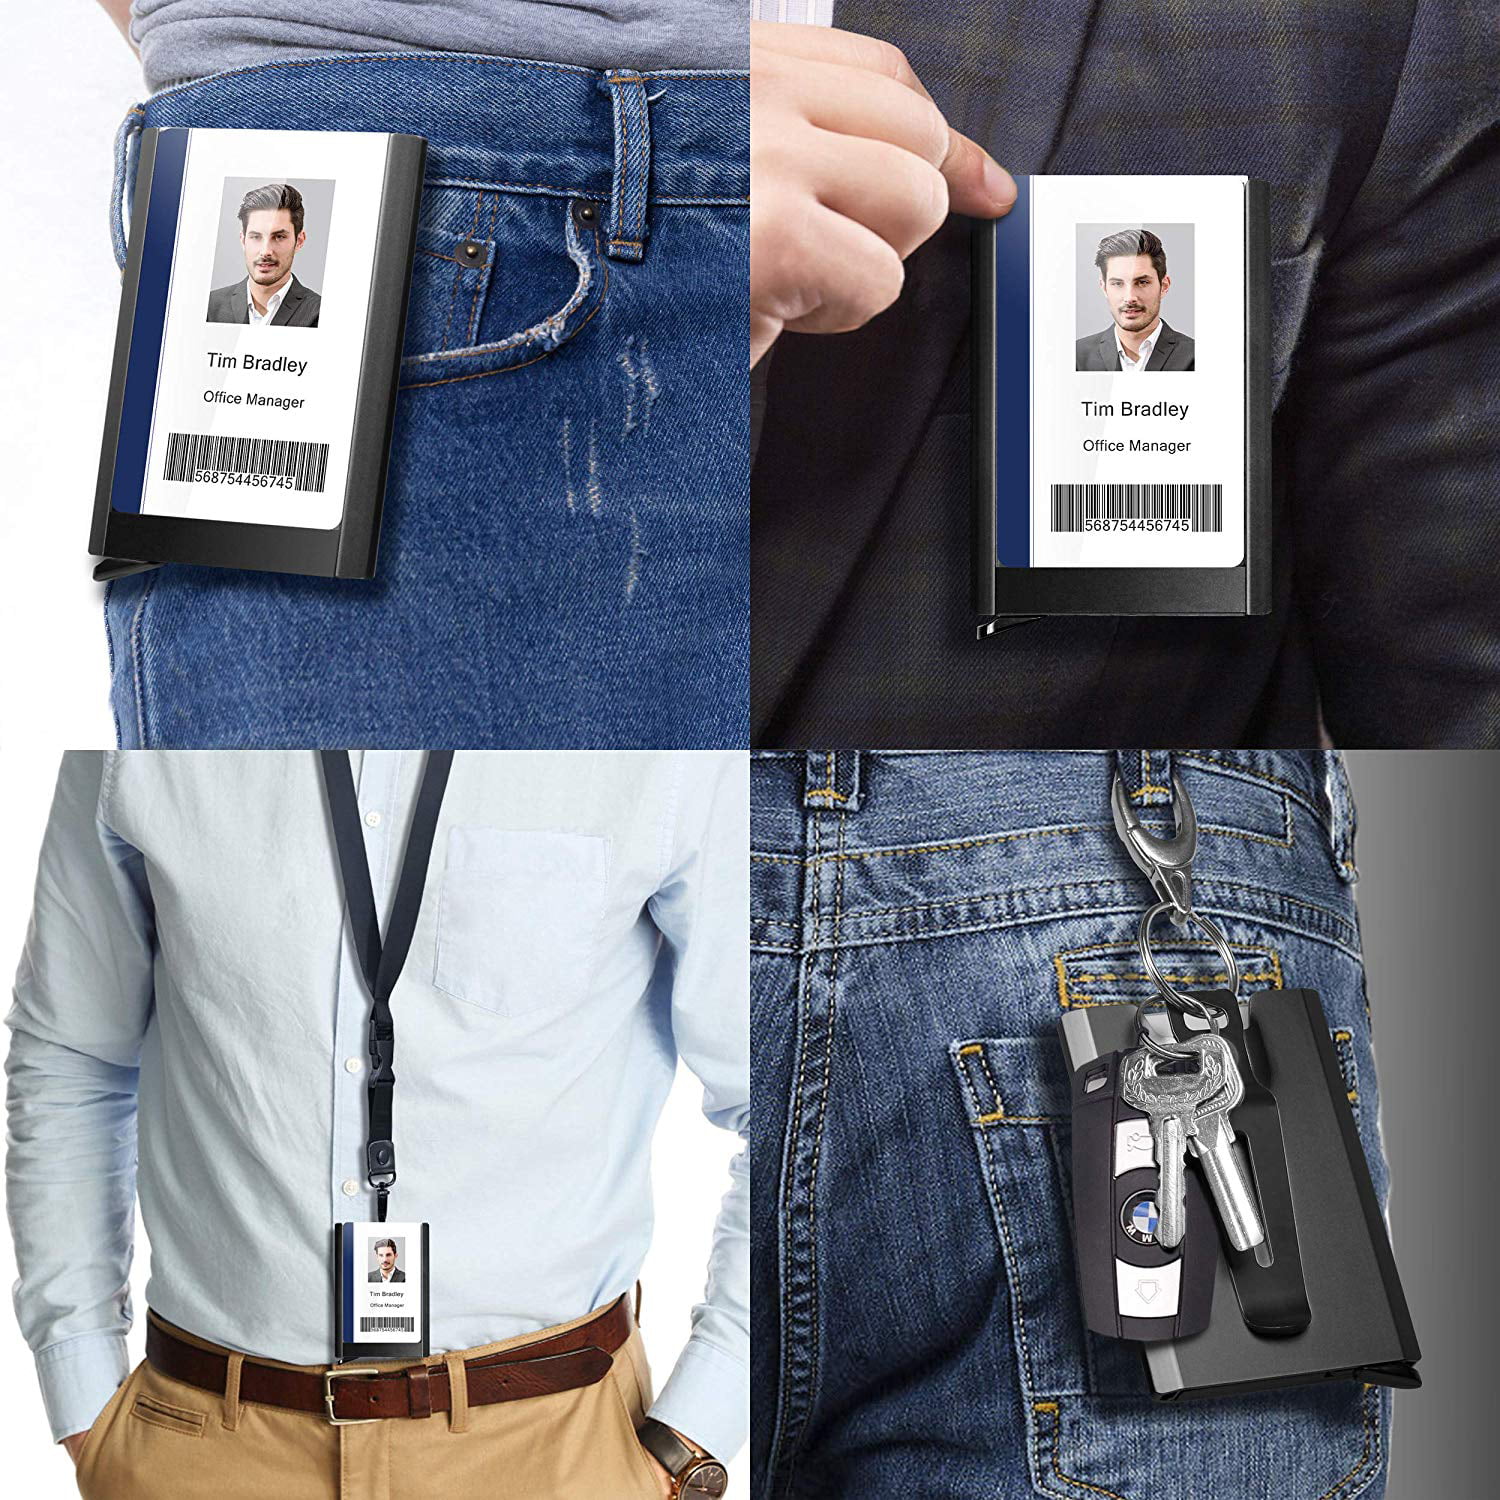  ELV Badge Holder Wallet, Aluminium ID Badge Card Holder Heavy  Duty with Quick Release Button, Metal Clip for Offices ID, School ID,  Driver Licence, Wallet, Holds 1-4 Cards : Office Products